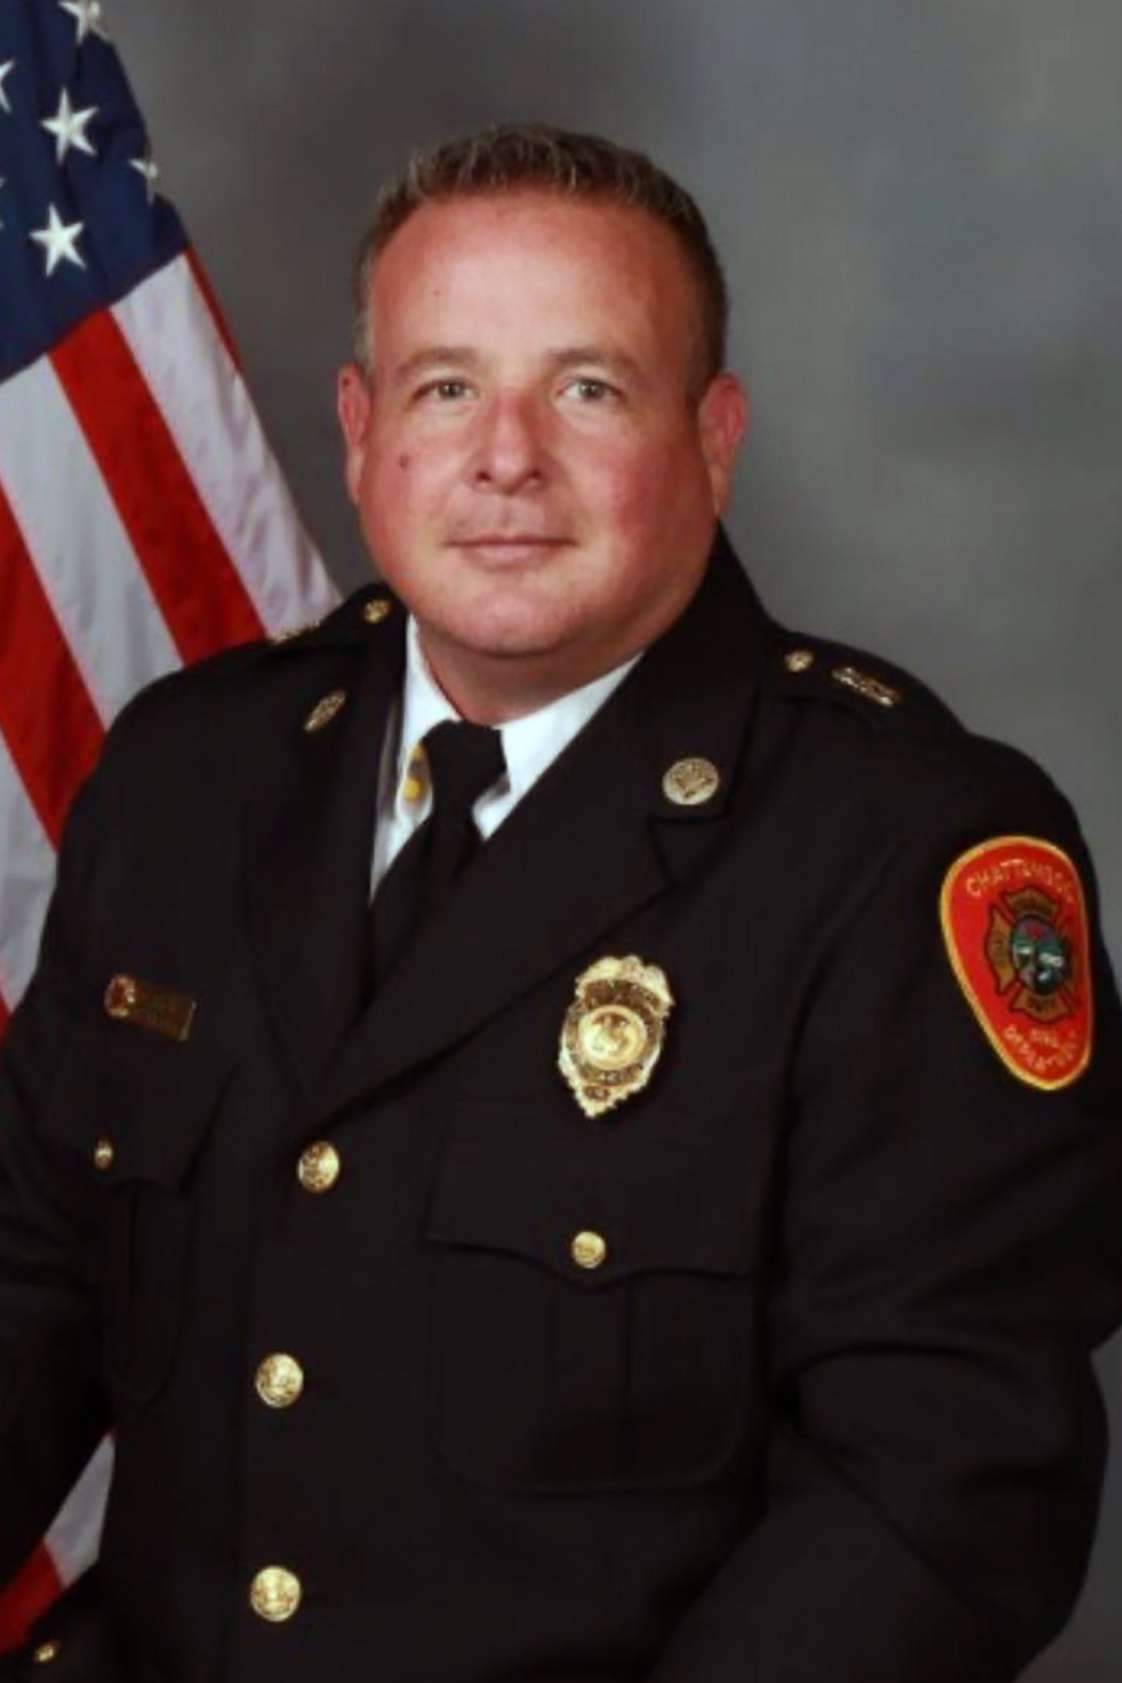 PHOTO: This undated photo released by the Chattanooga Fire Department shows Captain Brad Petty.